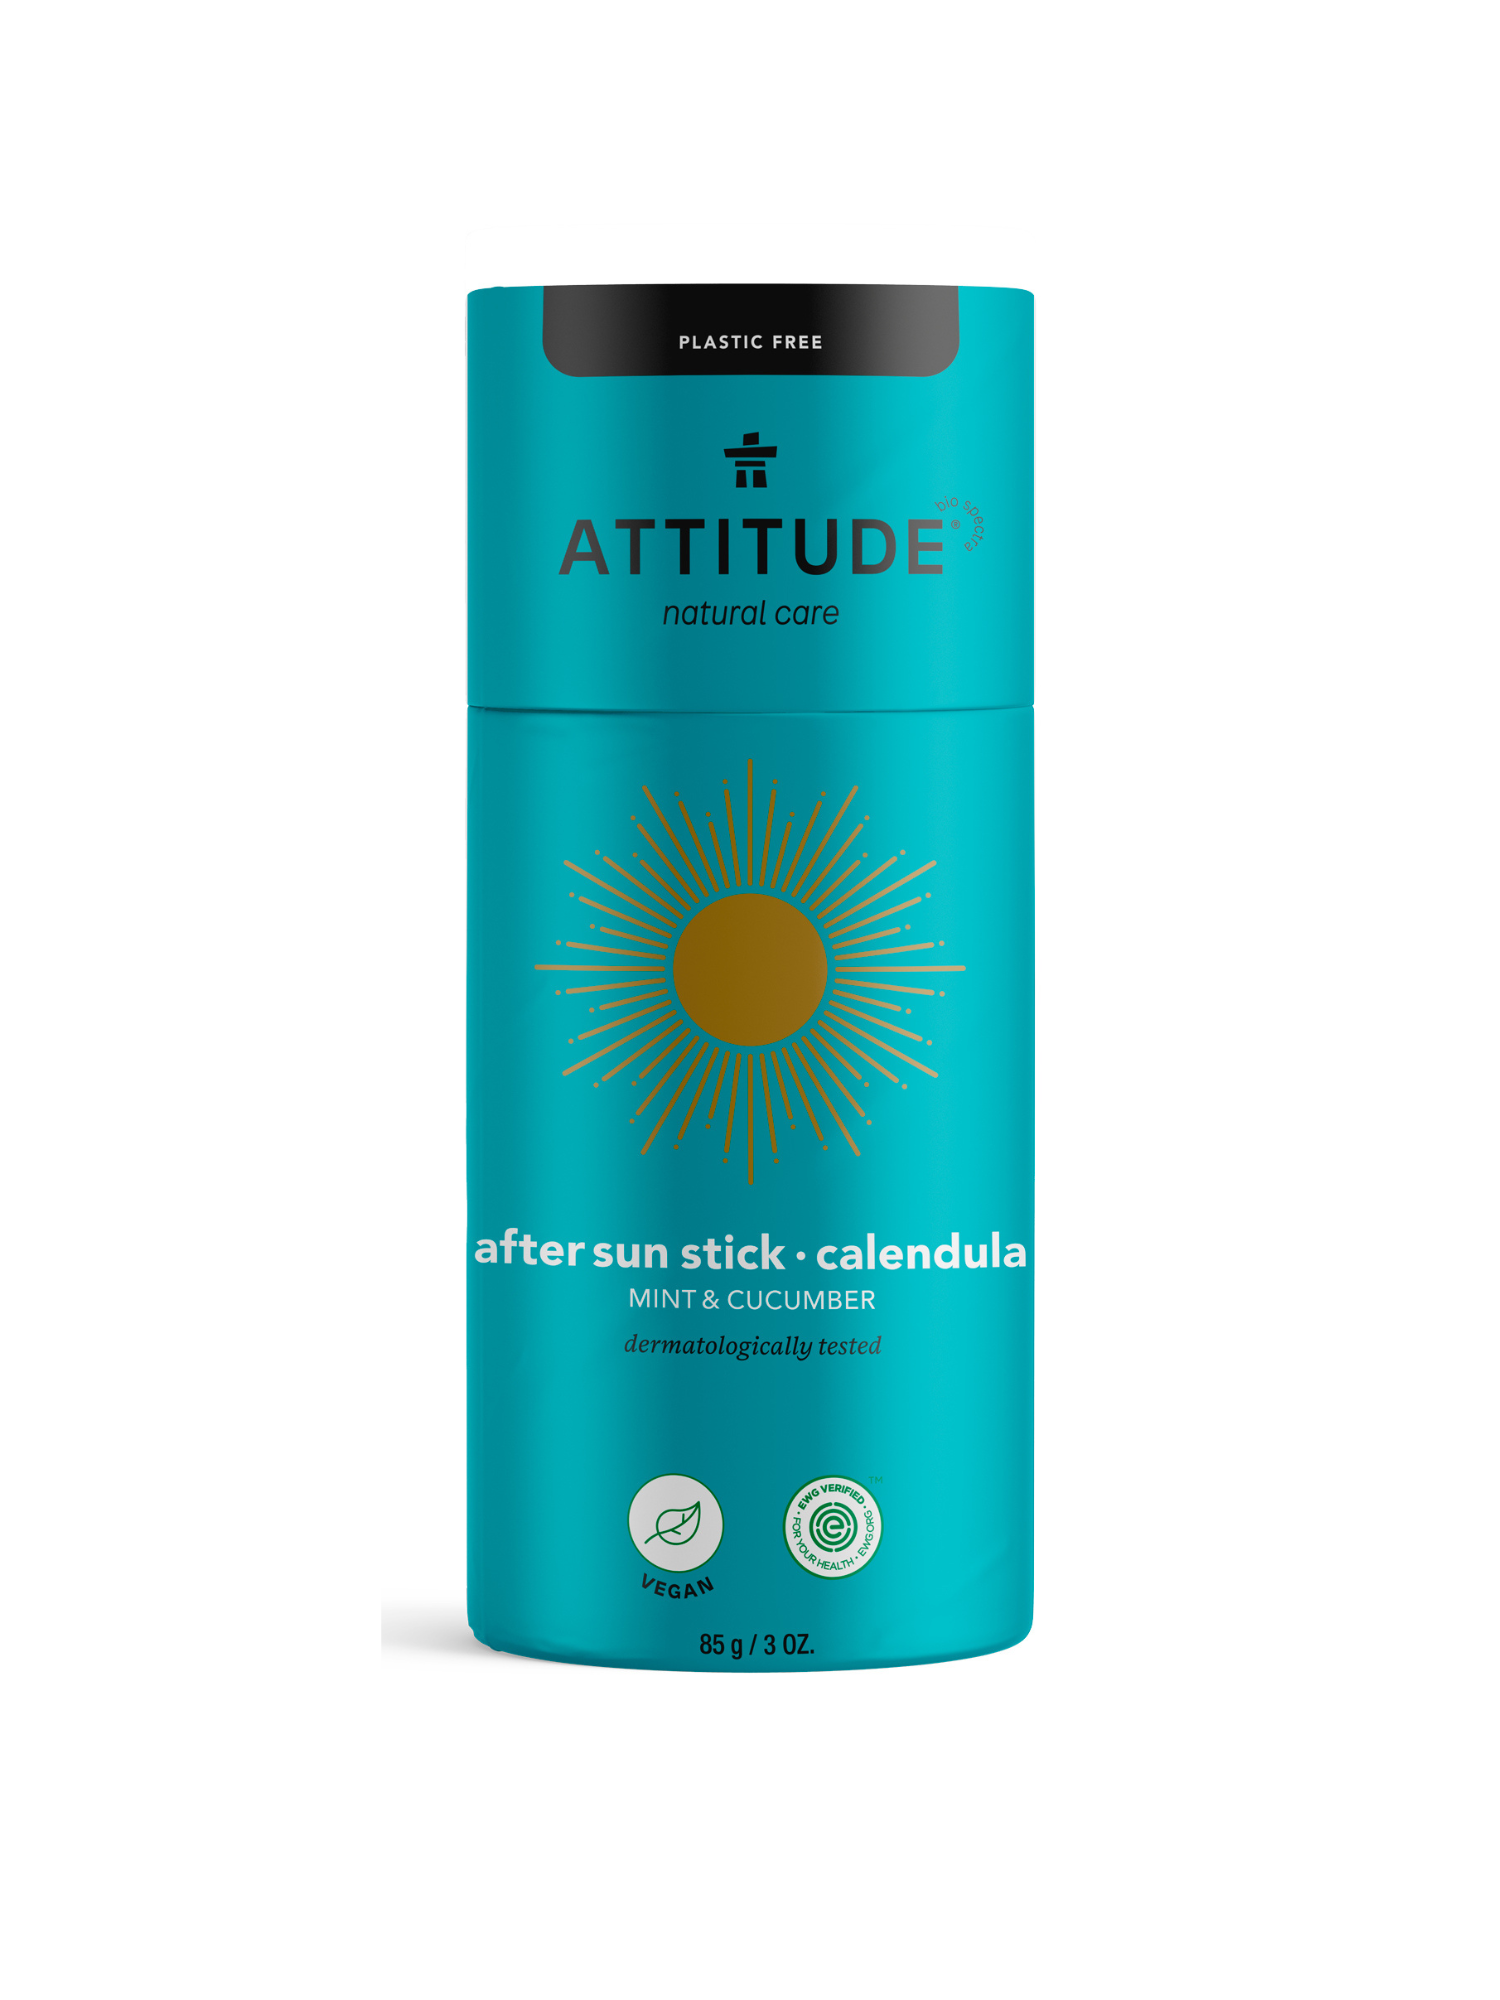 Natural Aftersun, Attitude, Nourished